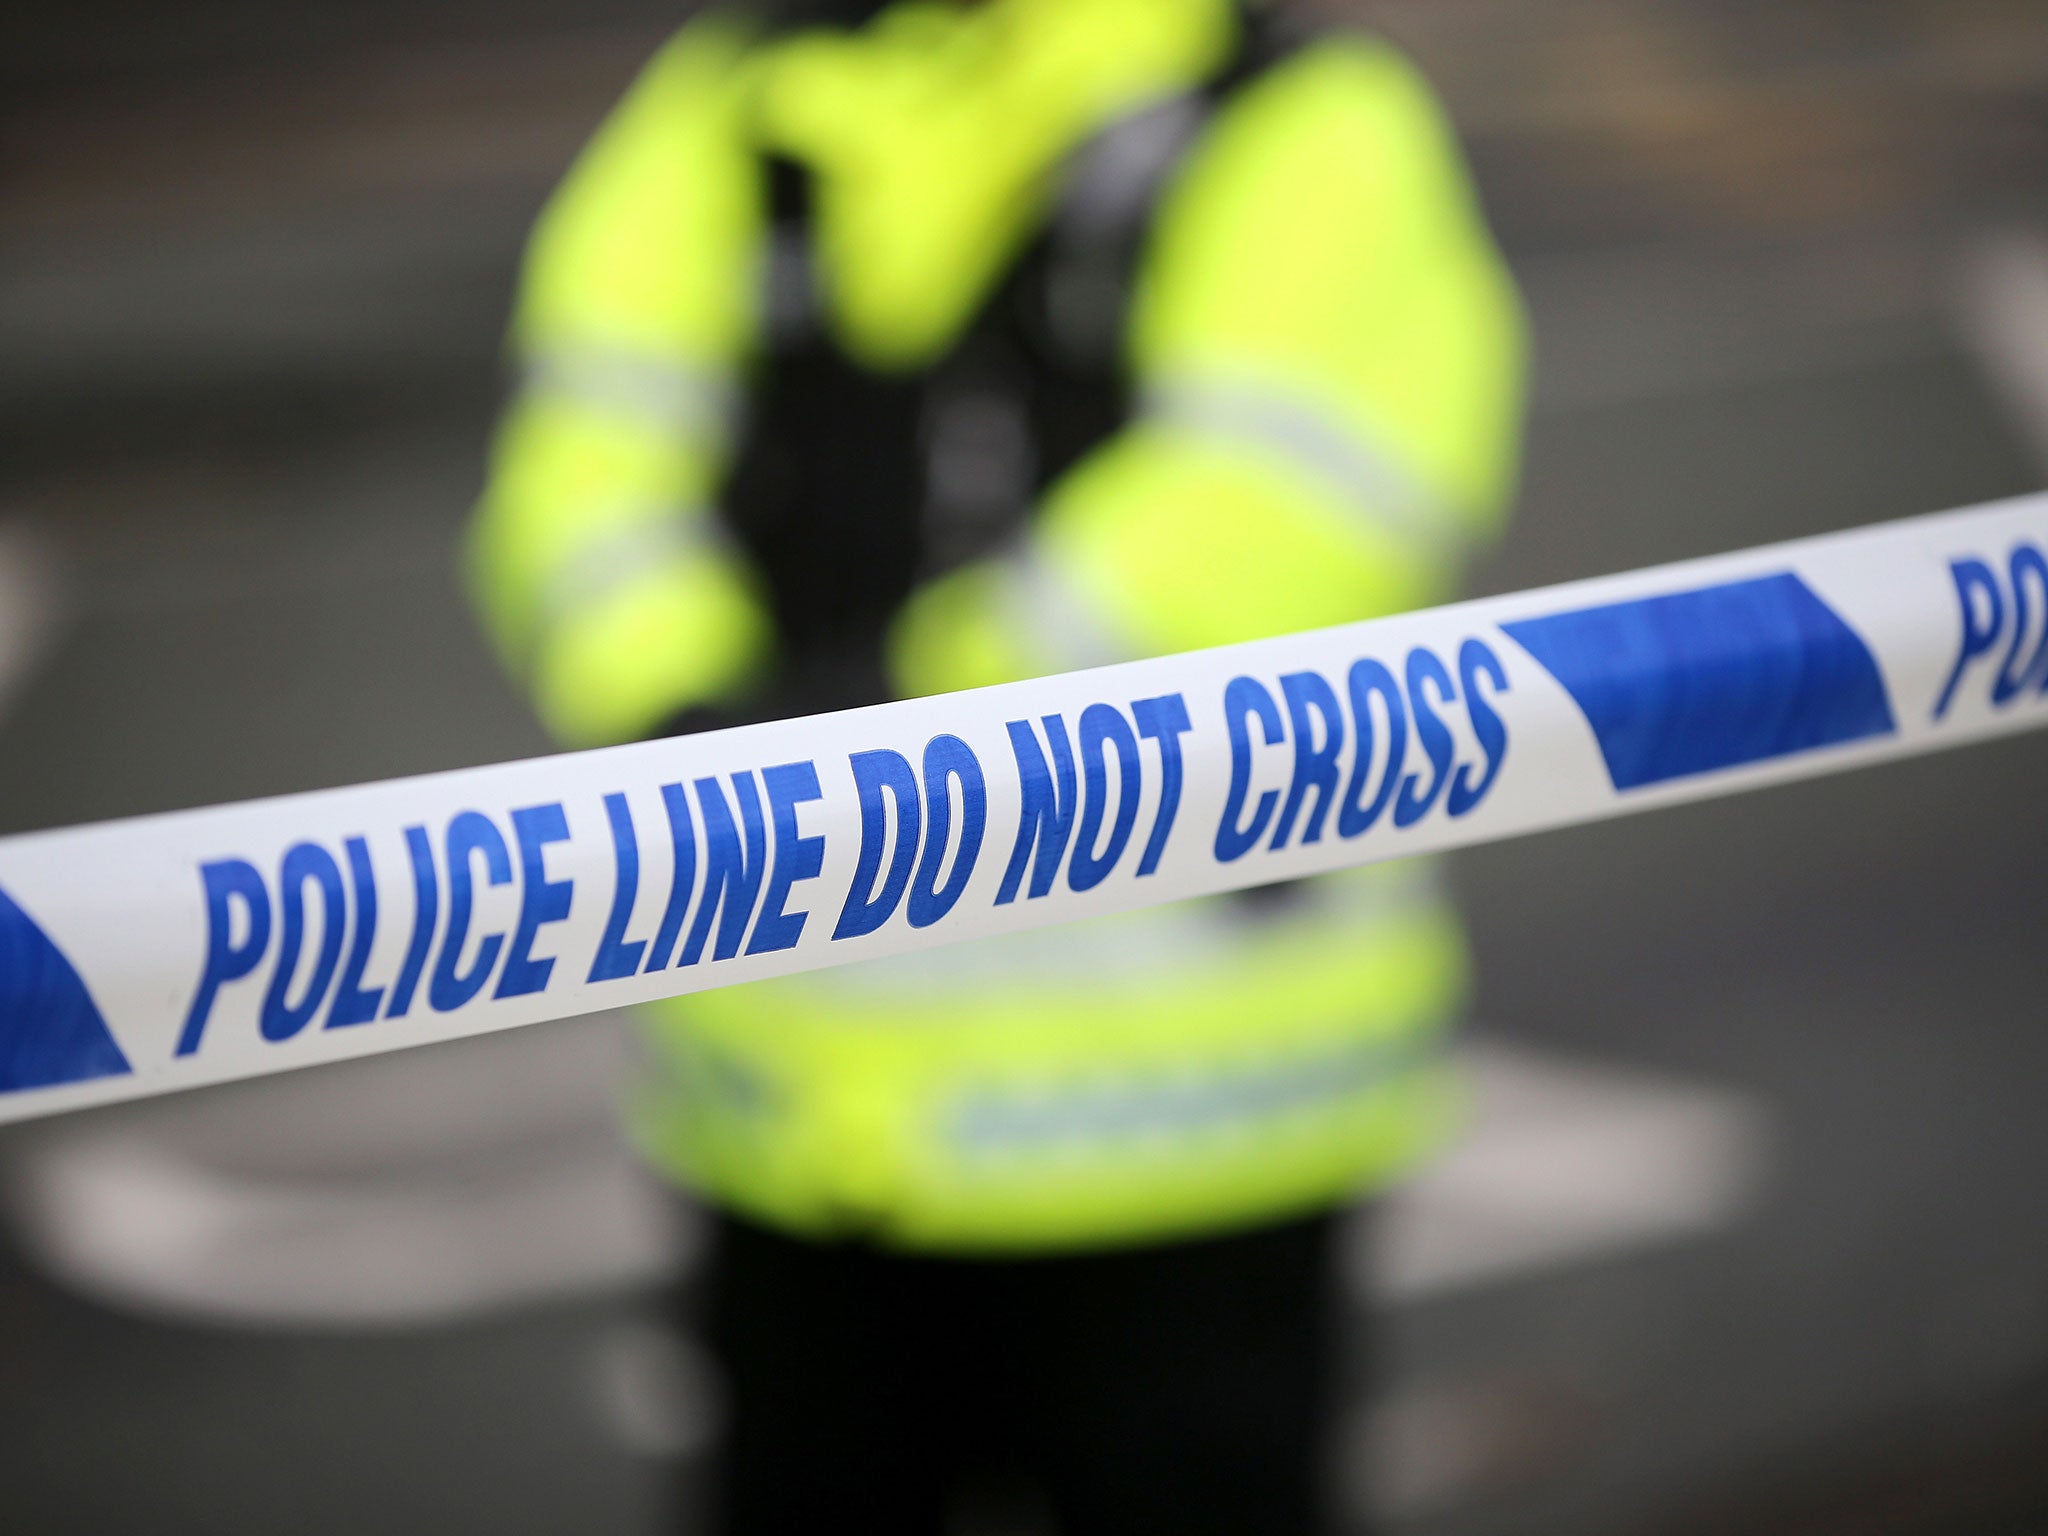 A three-year-old girl has died after being hit by a bus in Luton.